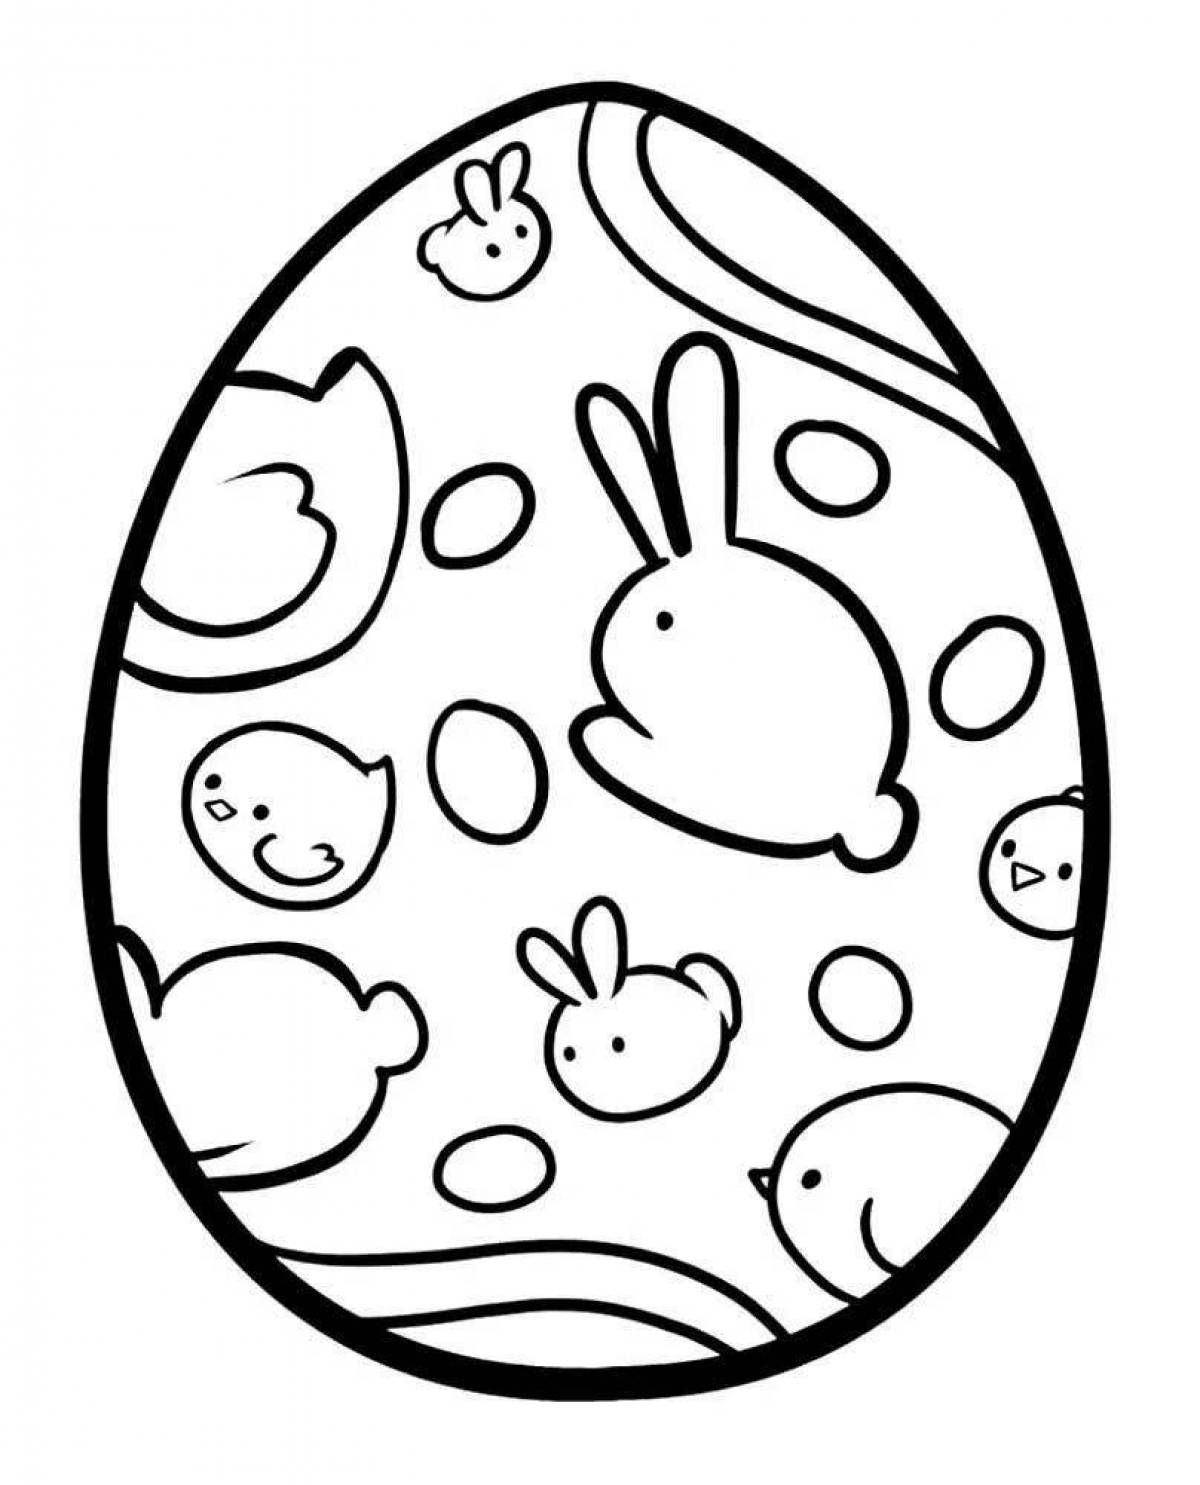 Gorgeous Egg coloring page